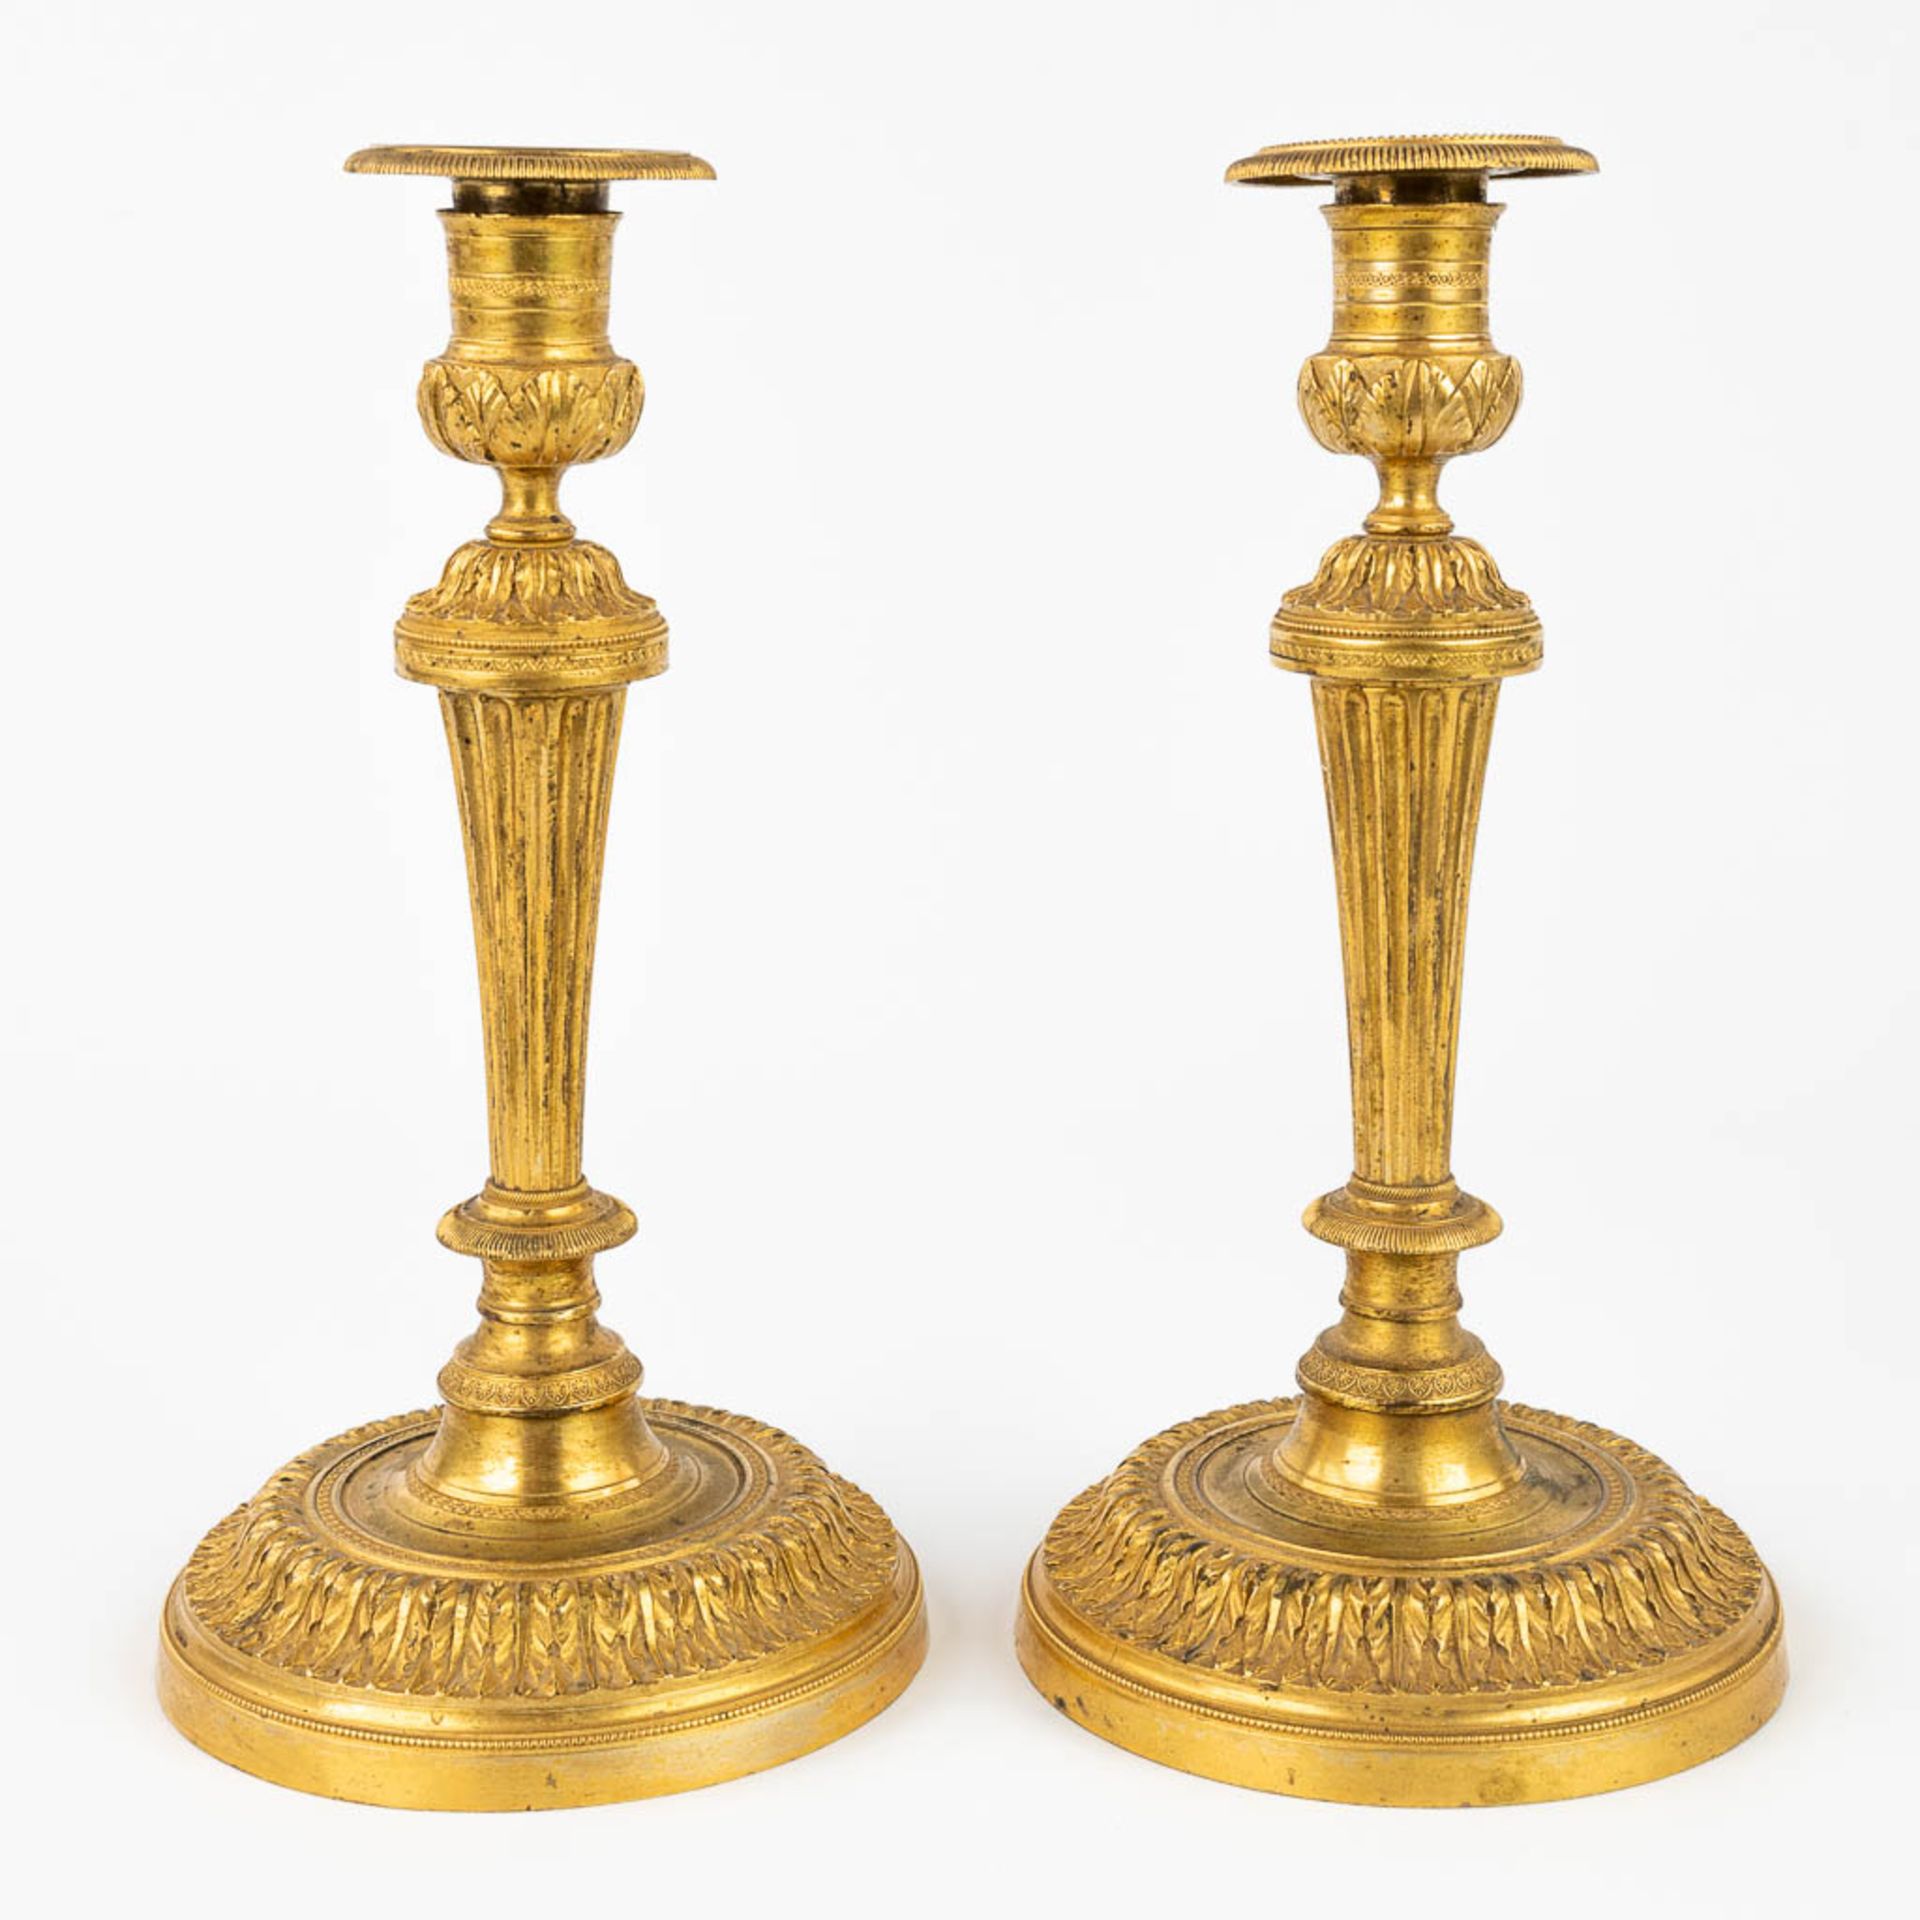 A pair of candlesticks made of gilt bronze in Louis XVI style. 19th C. (H:26 cm)